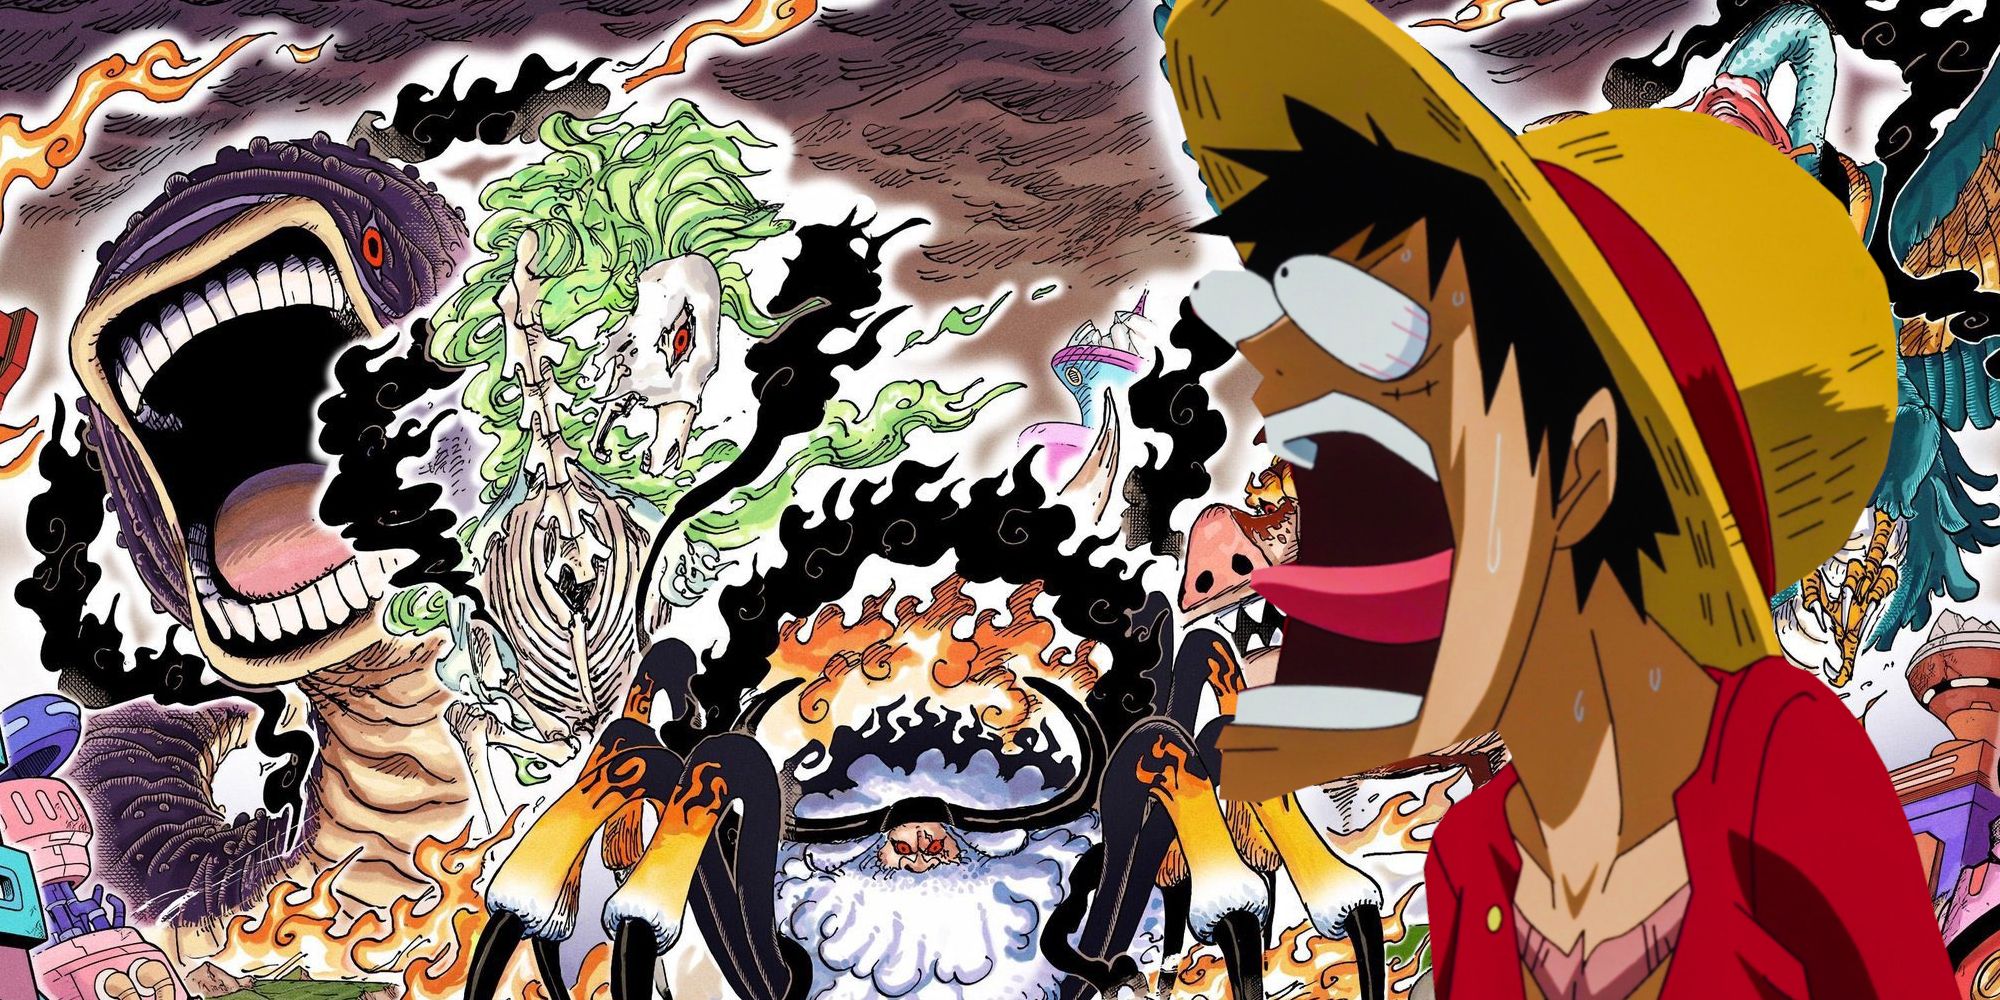 One Piece Five Elders in their demon forms in manga chapter 1110 Colored while Luffy looks at them Shocked.